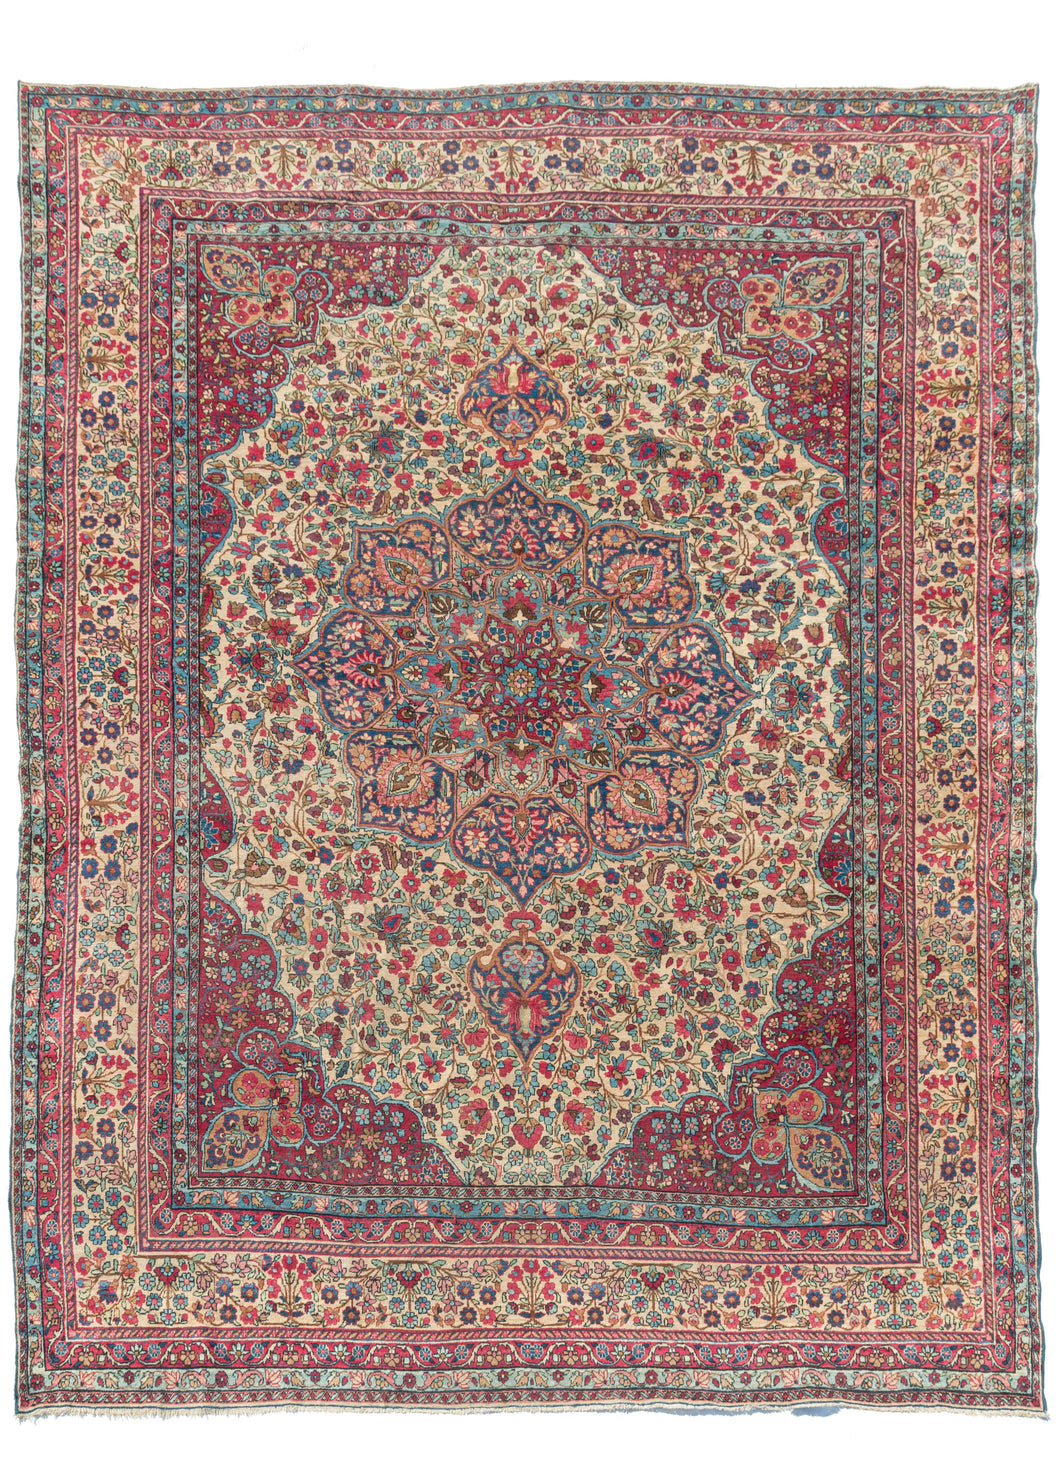 Antique Persian Lavar Kerman room size rug featuring intricate central medallion with a curvilinear floral design and scalloped cornices. The cornices are distinct but have a continuous feel with the large and medallion each with an apricot finial device on a scarlet  rosette filled backdrop. 